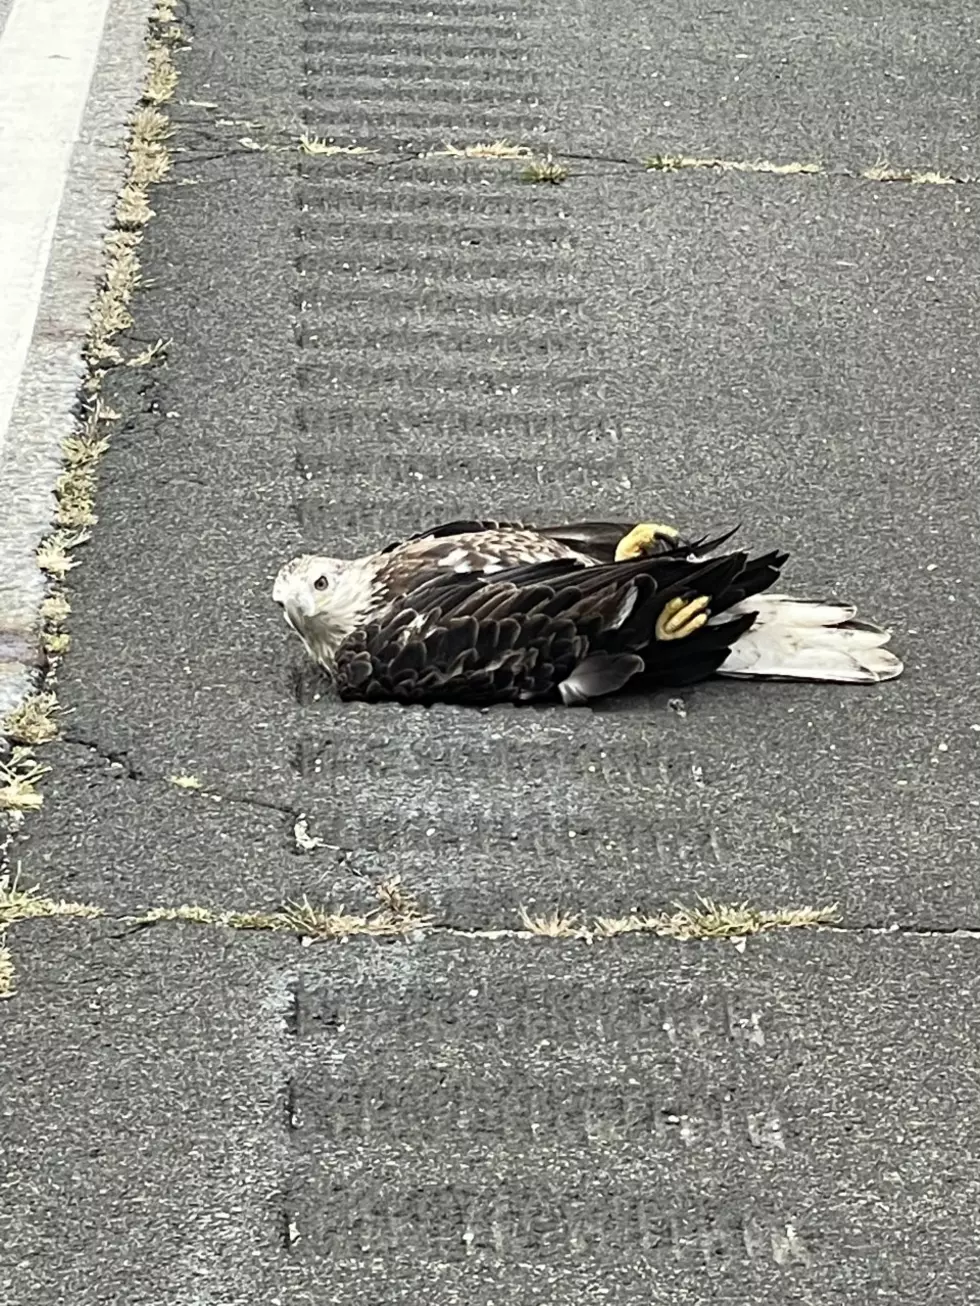 New York Police Officers Help Bald Eagle In Time Of Need